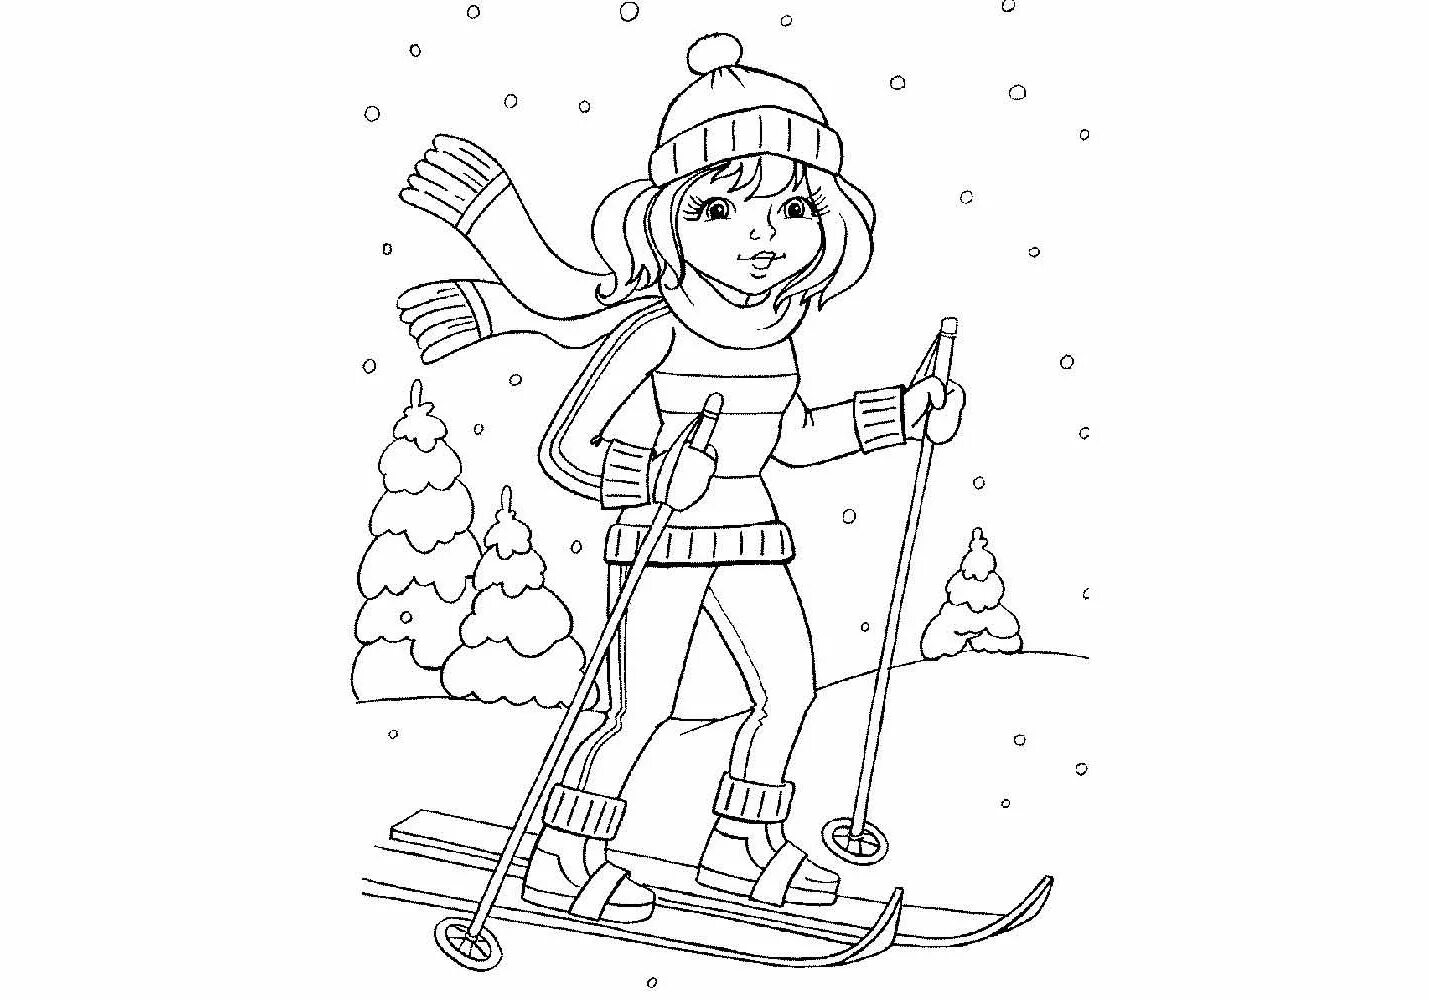 Coloring book witty senior skier